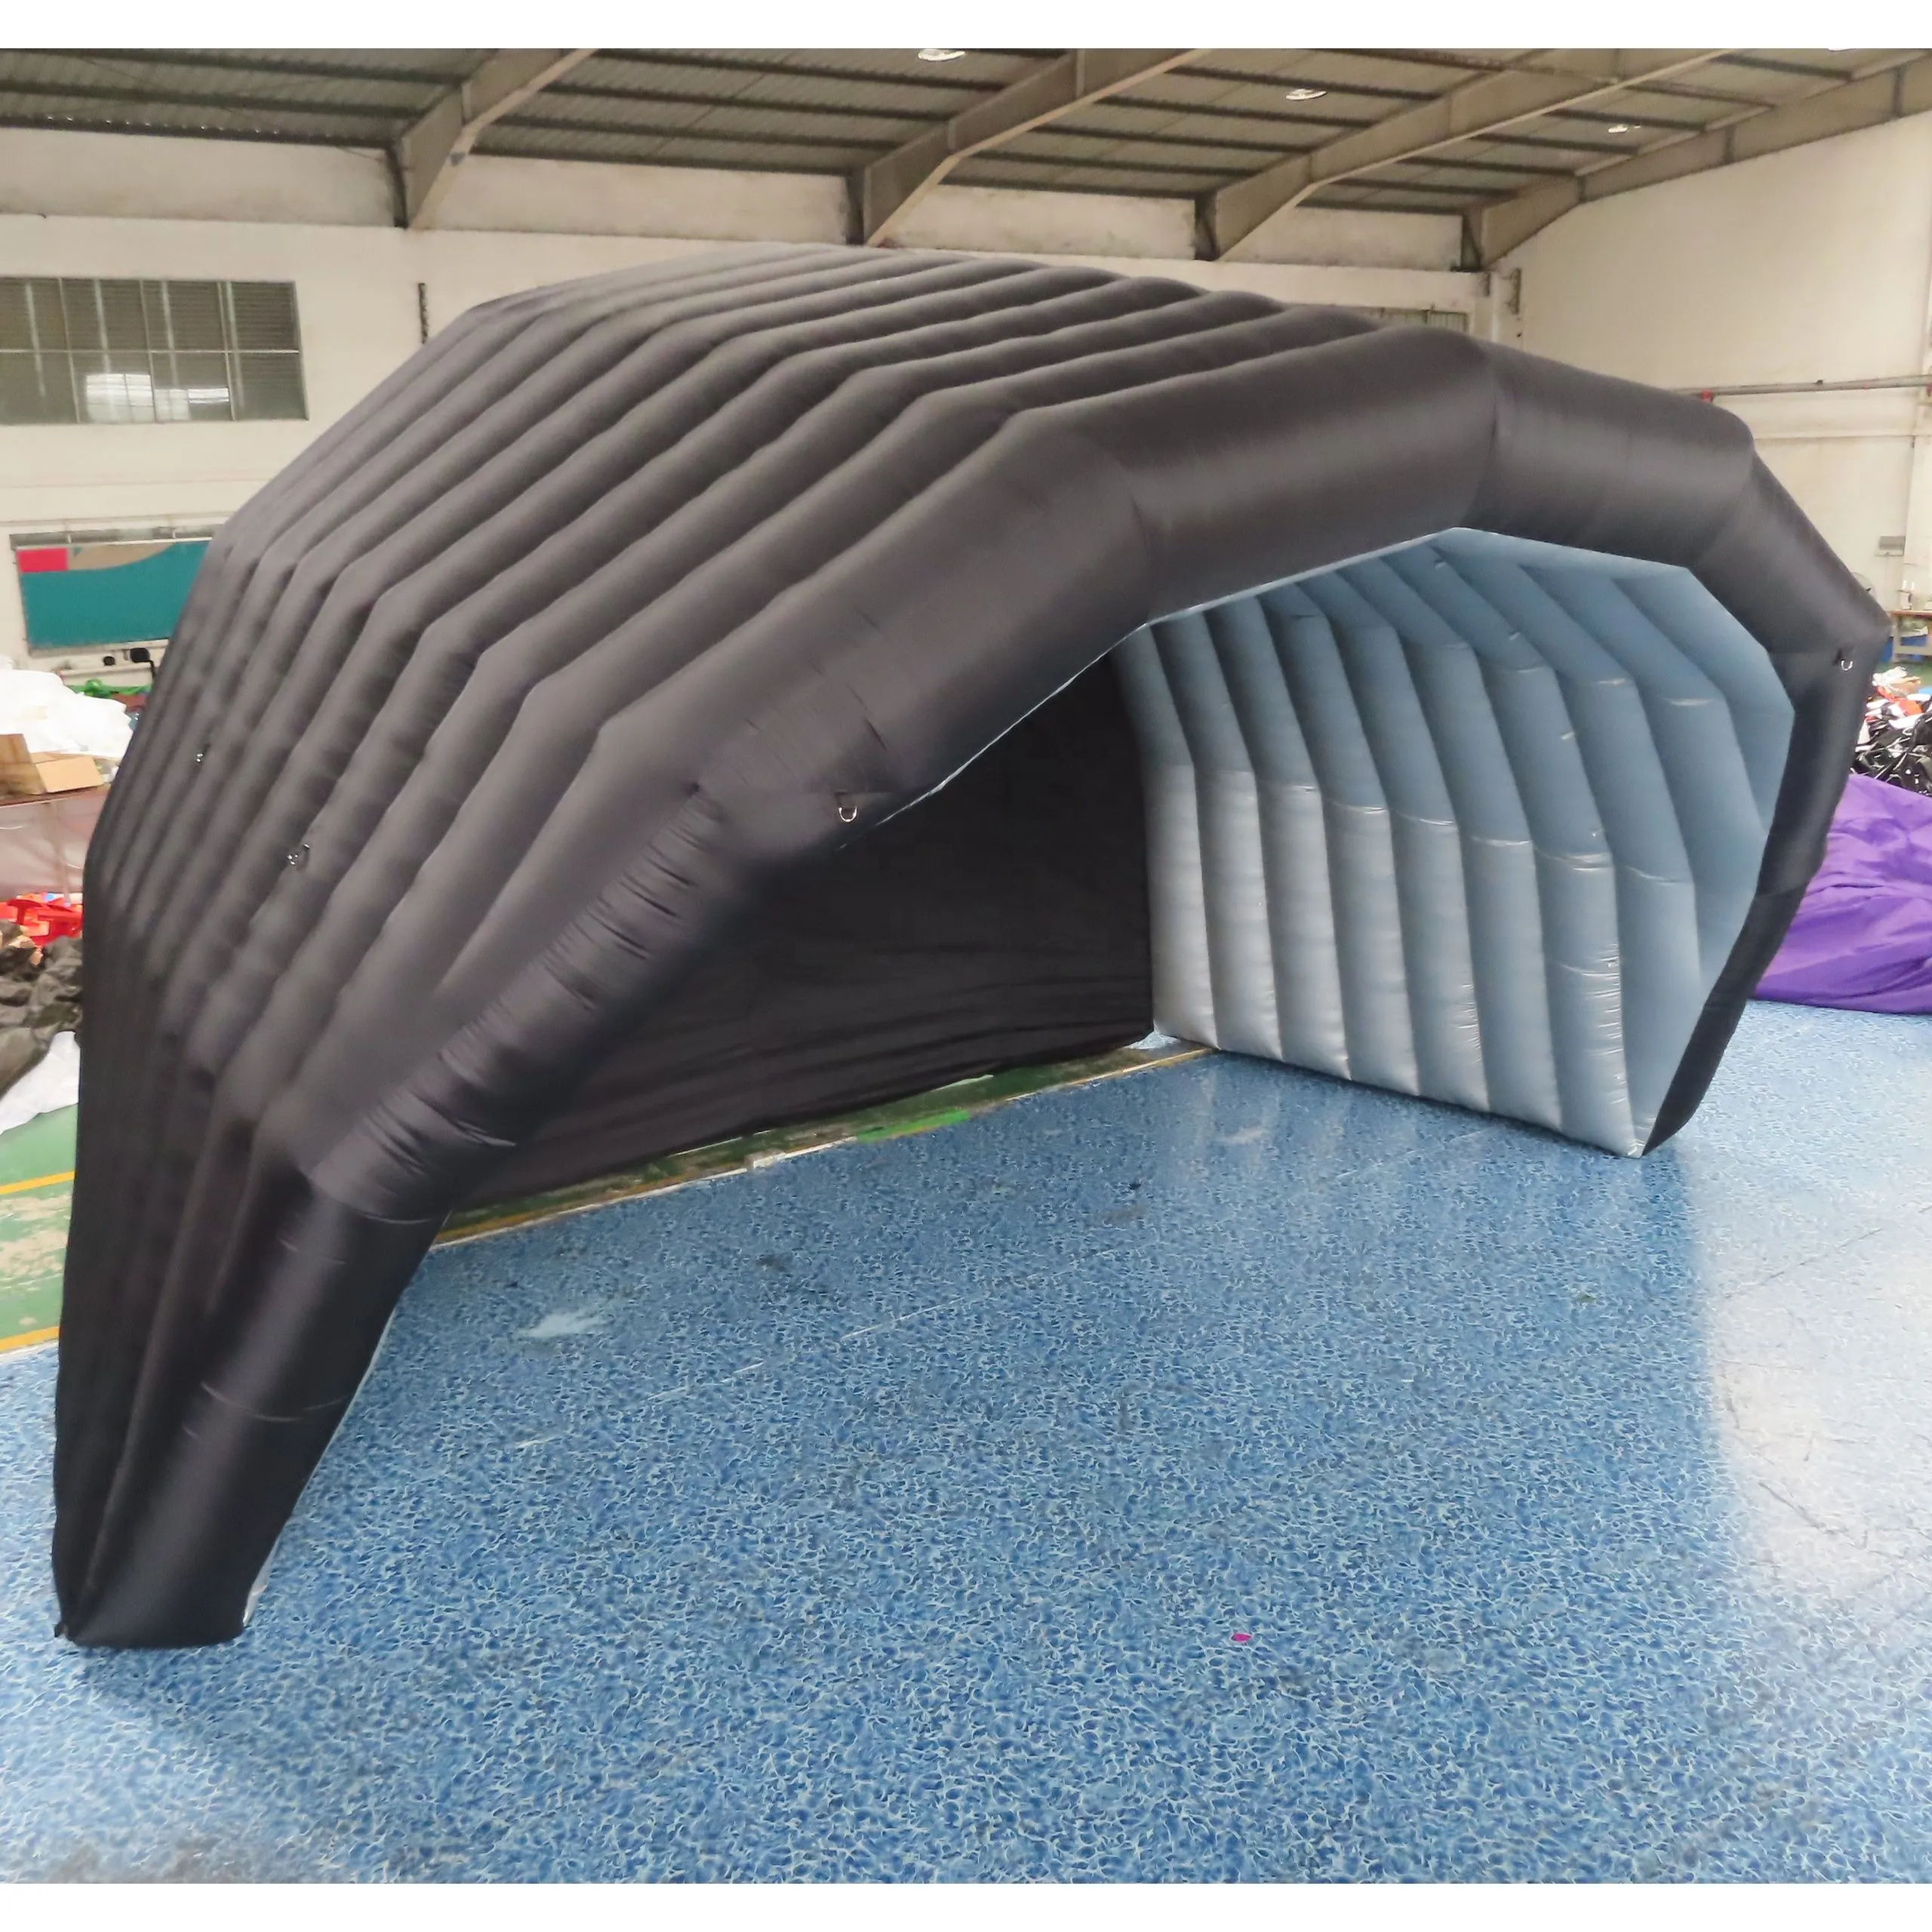 Free Ship Giant 10mWx6mDx5mH (33x20x16.5ft) Outdoor Inflatable Stage Cover Tent For Concert Performance Events